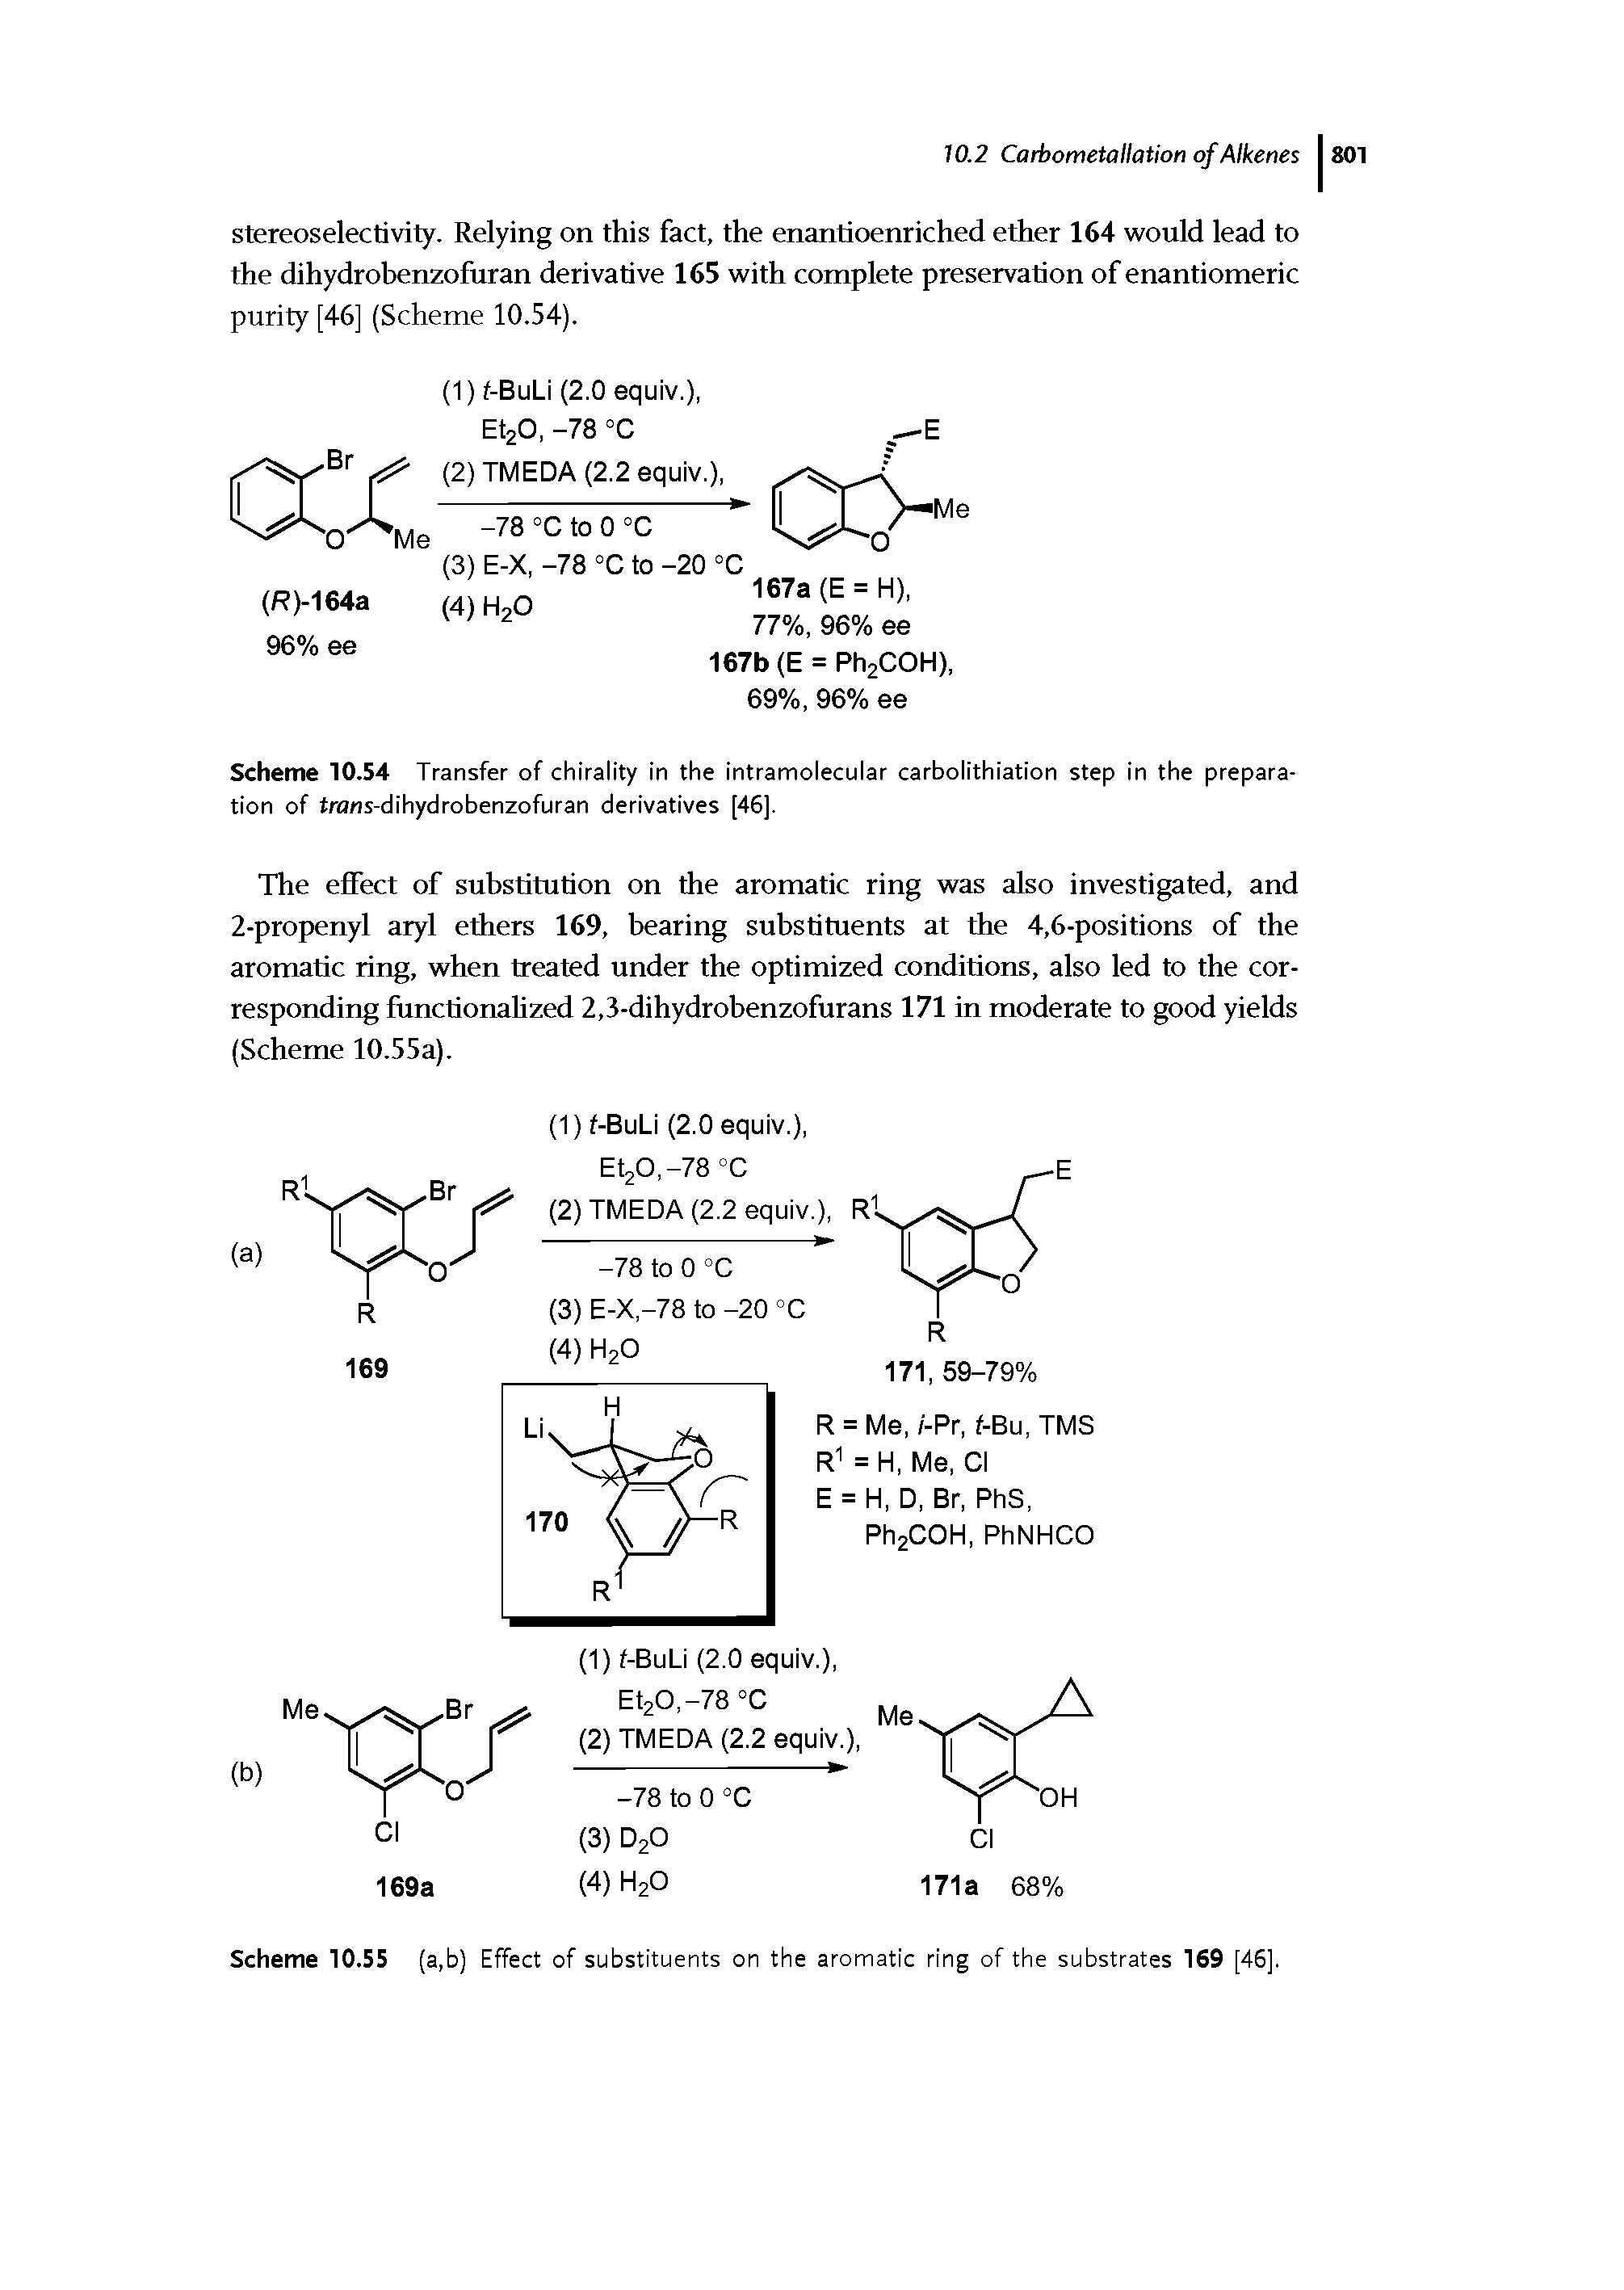 Scheme 10.54 Transfer of chirality in the intramolecular carbolithiation step in the preparation of trons-dihydrobenzofuran derivatives [46].